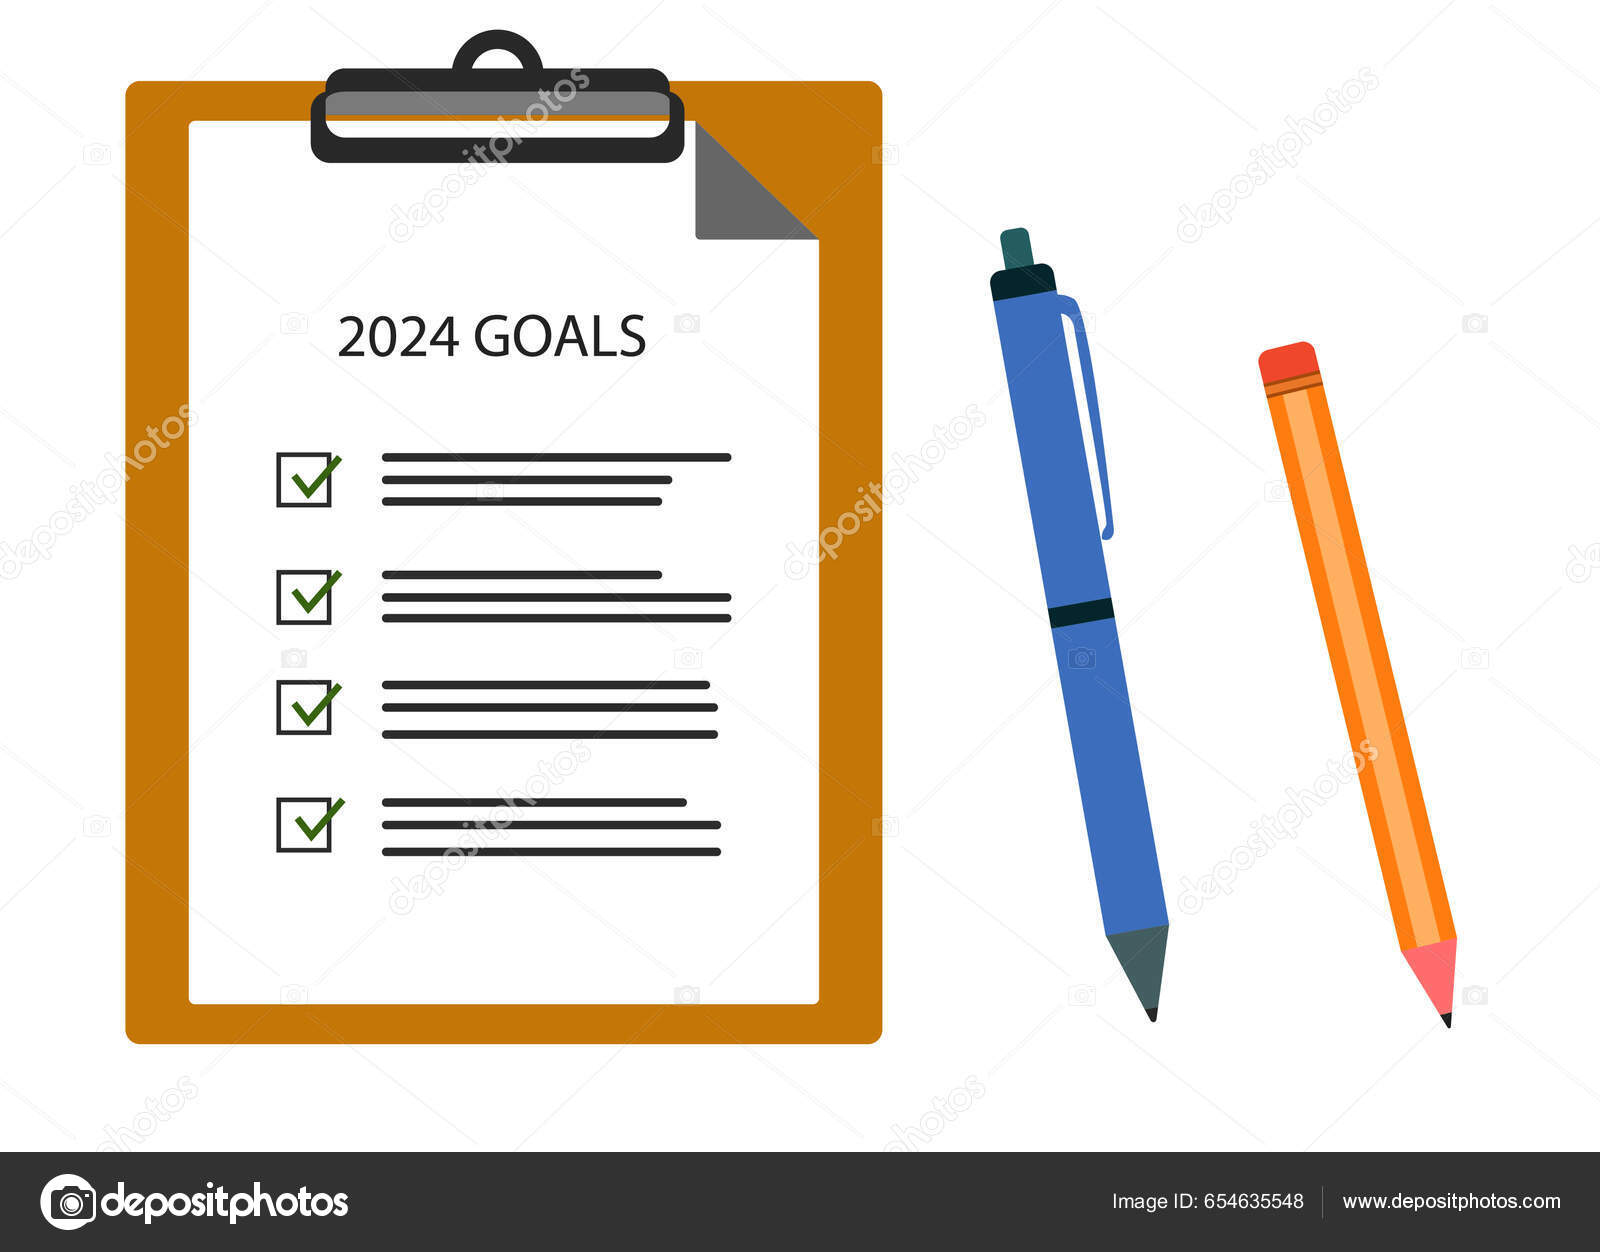 2024-goals-approved-file-2024-year-plan-idea-concept-business-stock-vector-by-seda-abaci-654635548